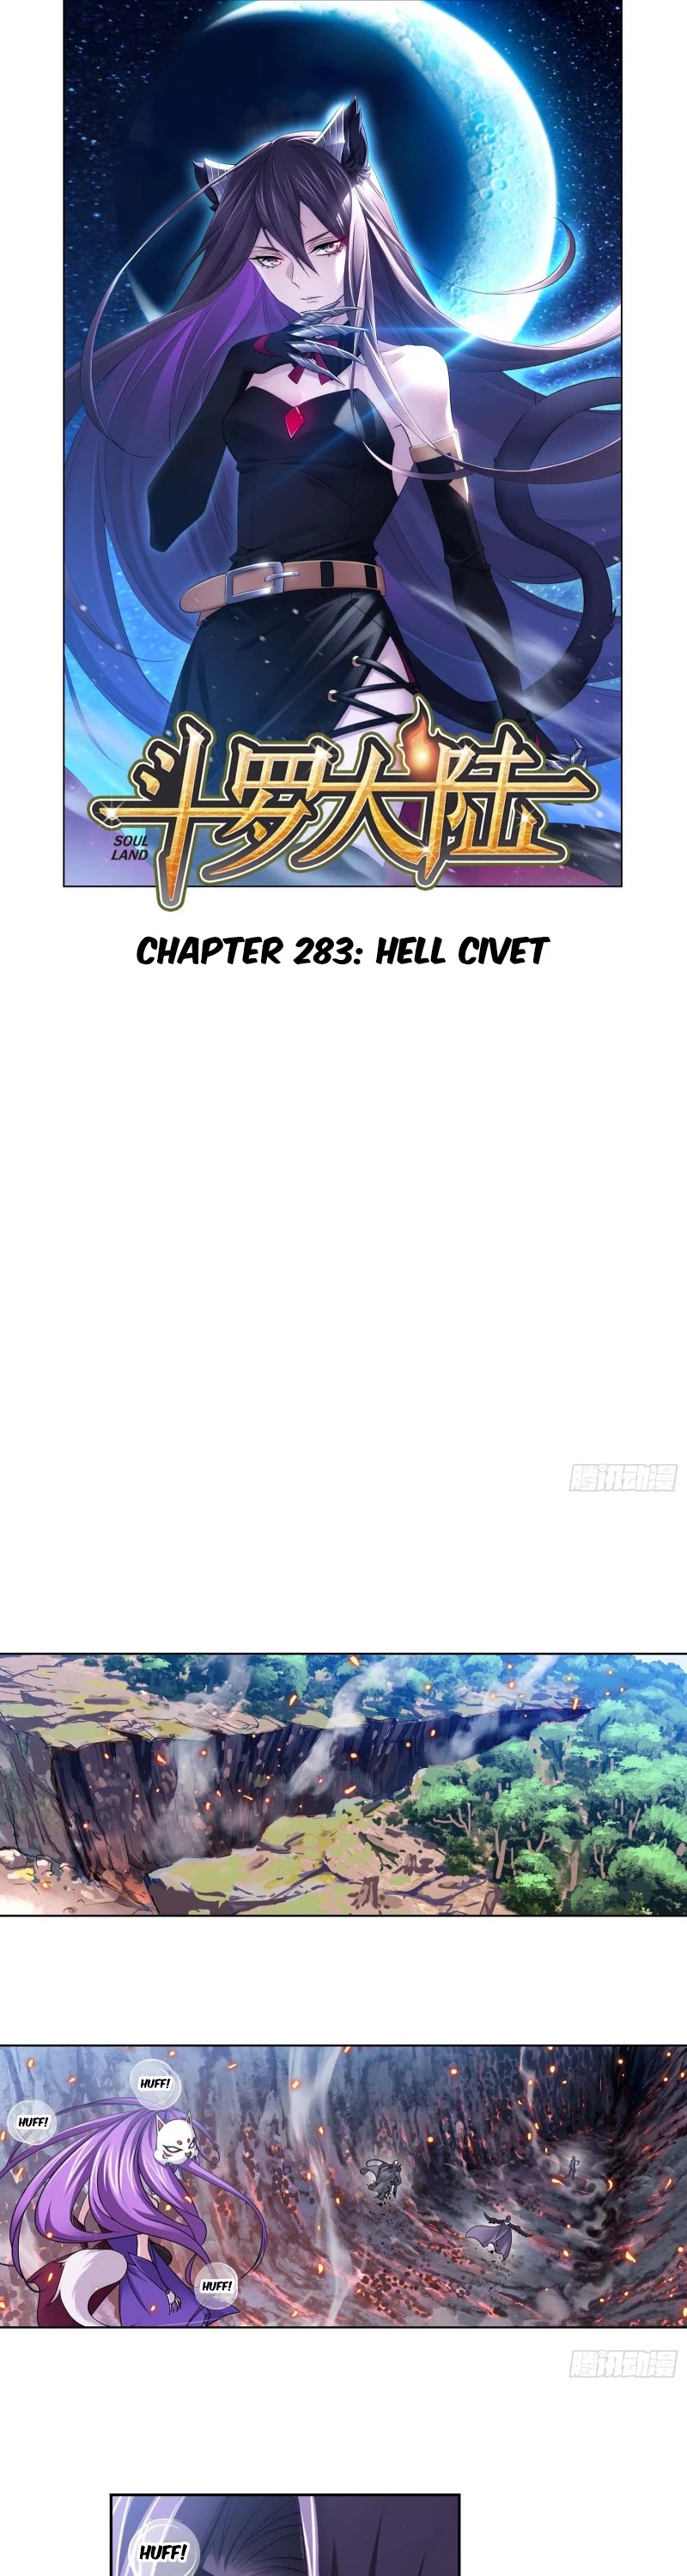 Doulou Dalu Chapter 283: Hell Civet - Picture 2